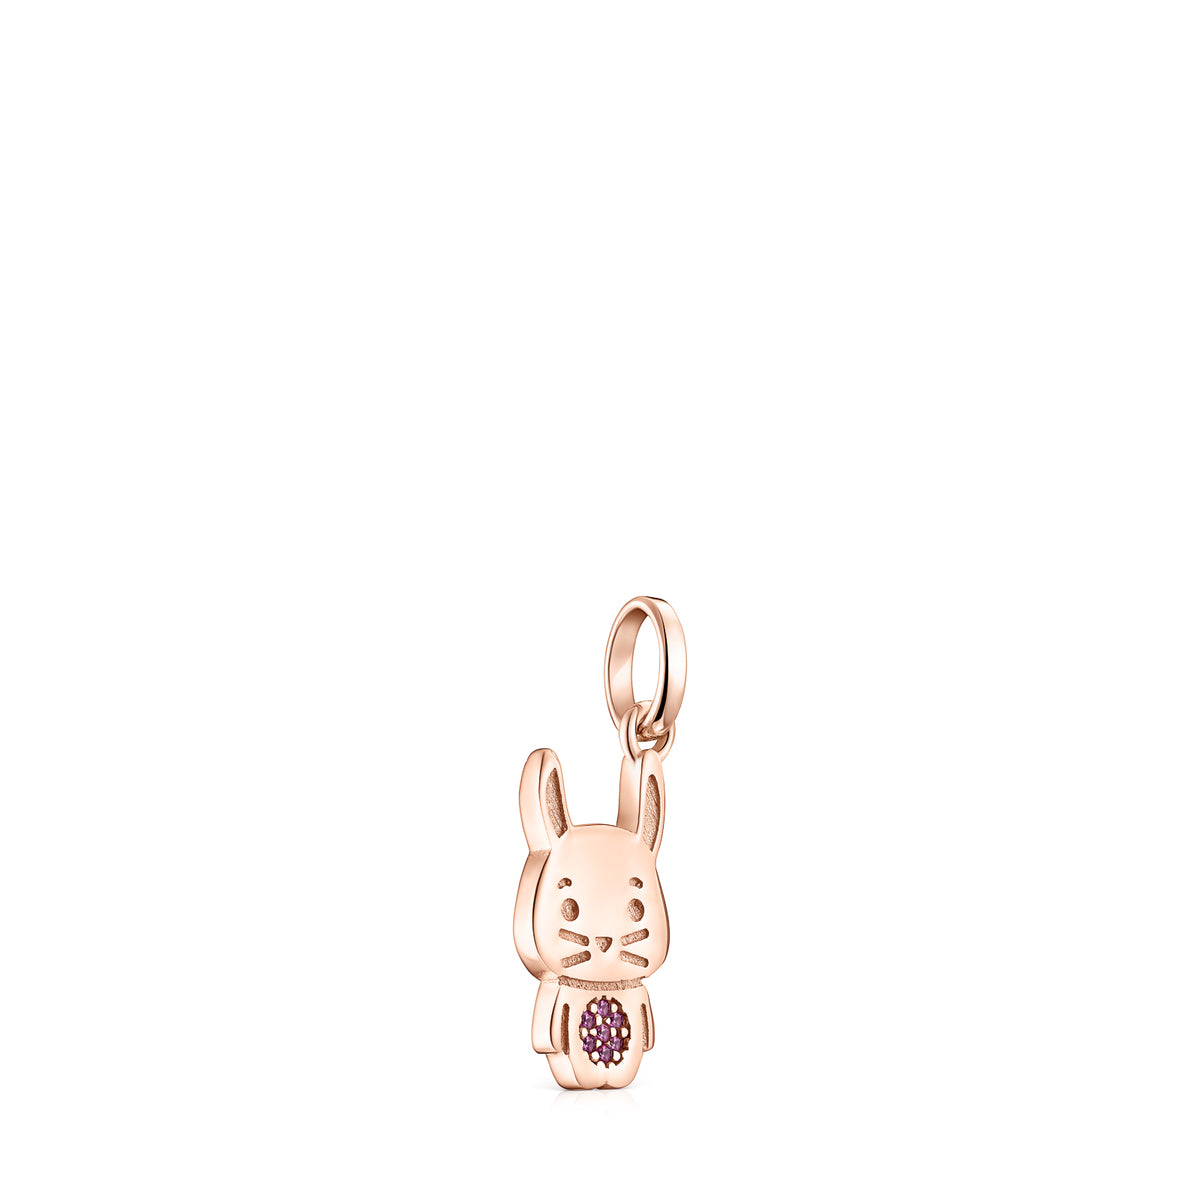 Tous Chinese Horoscope Rabbit Pendant in Rose Gold Vermeil with Ruby 918434550